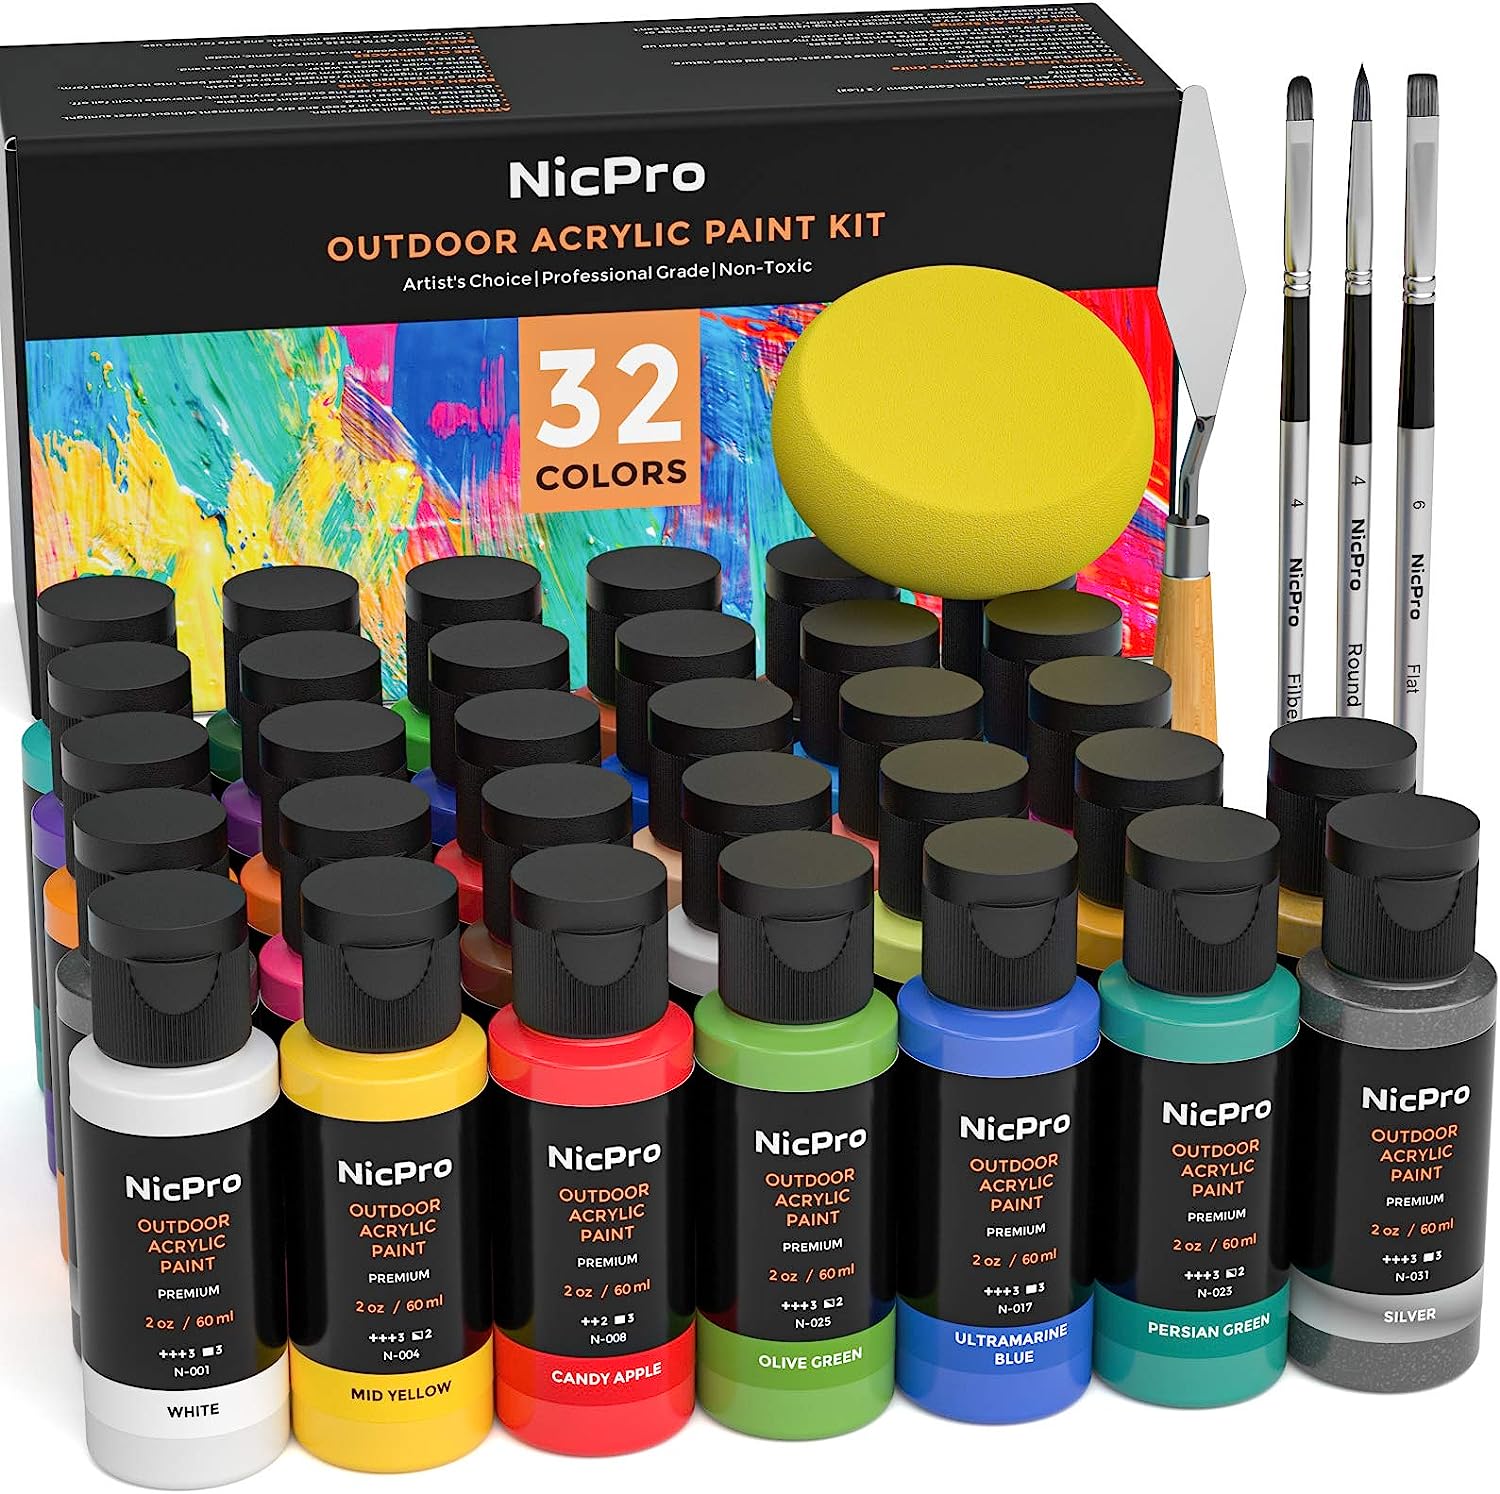 Nicpro 32 Colors Outdoor Acrylic Paint Bulk with Brush [...]